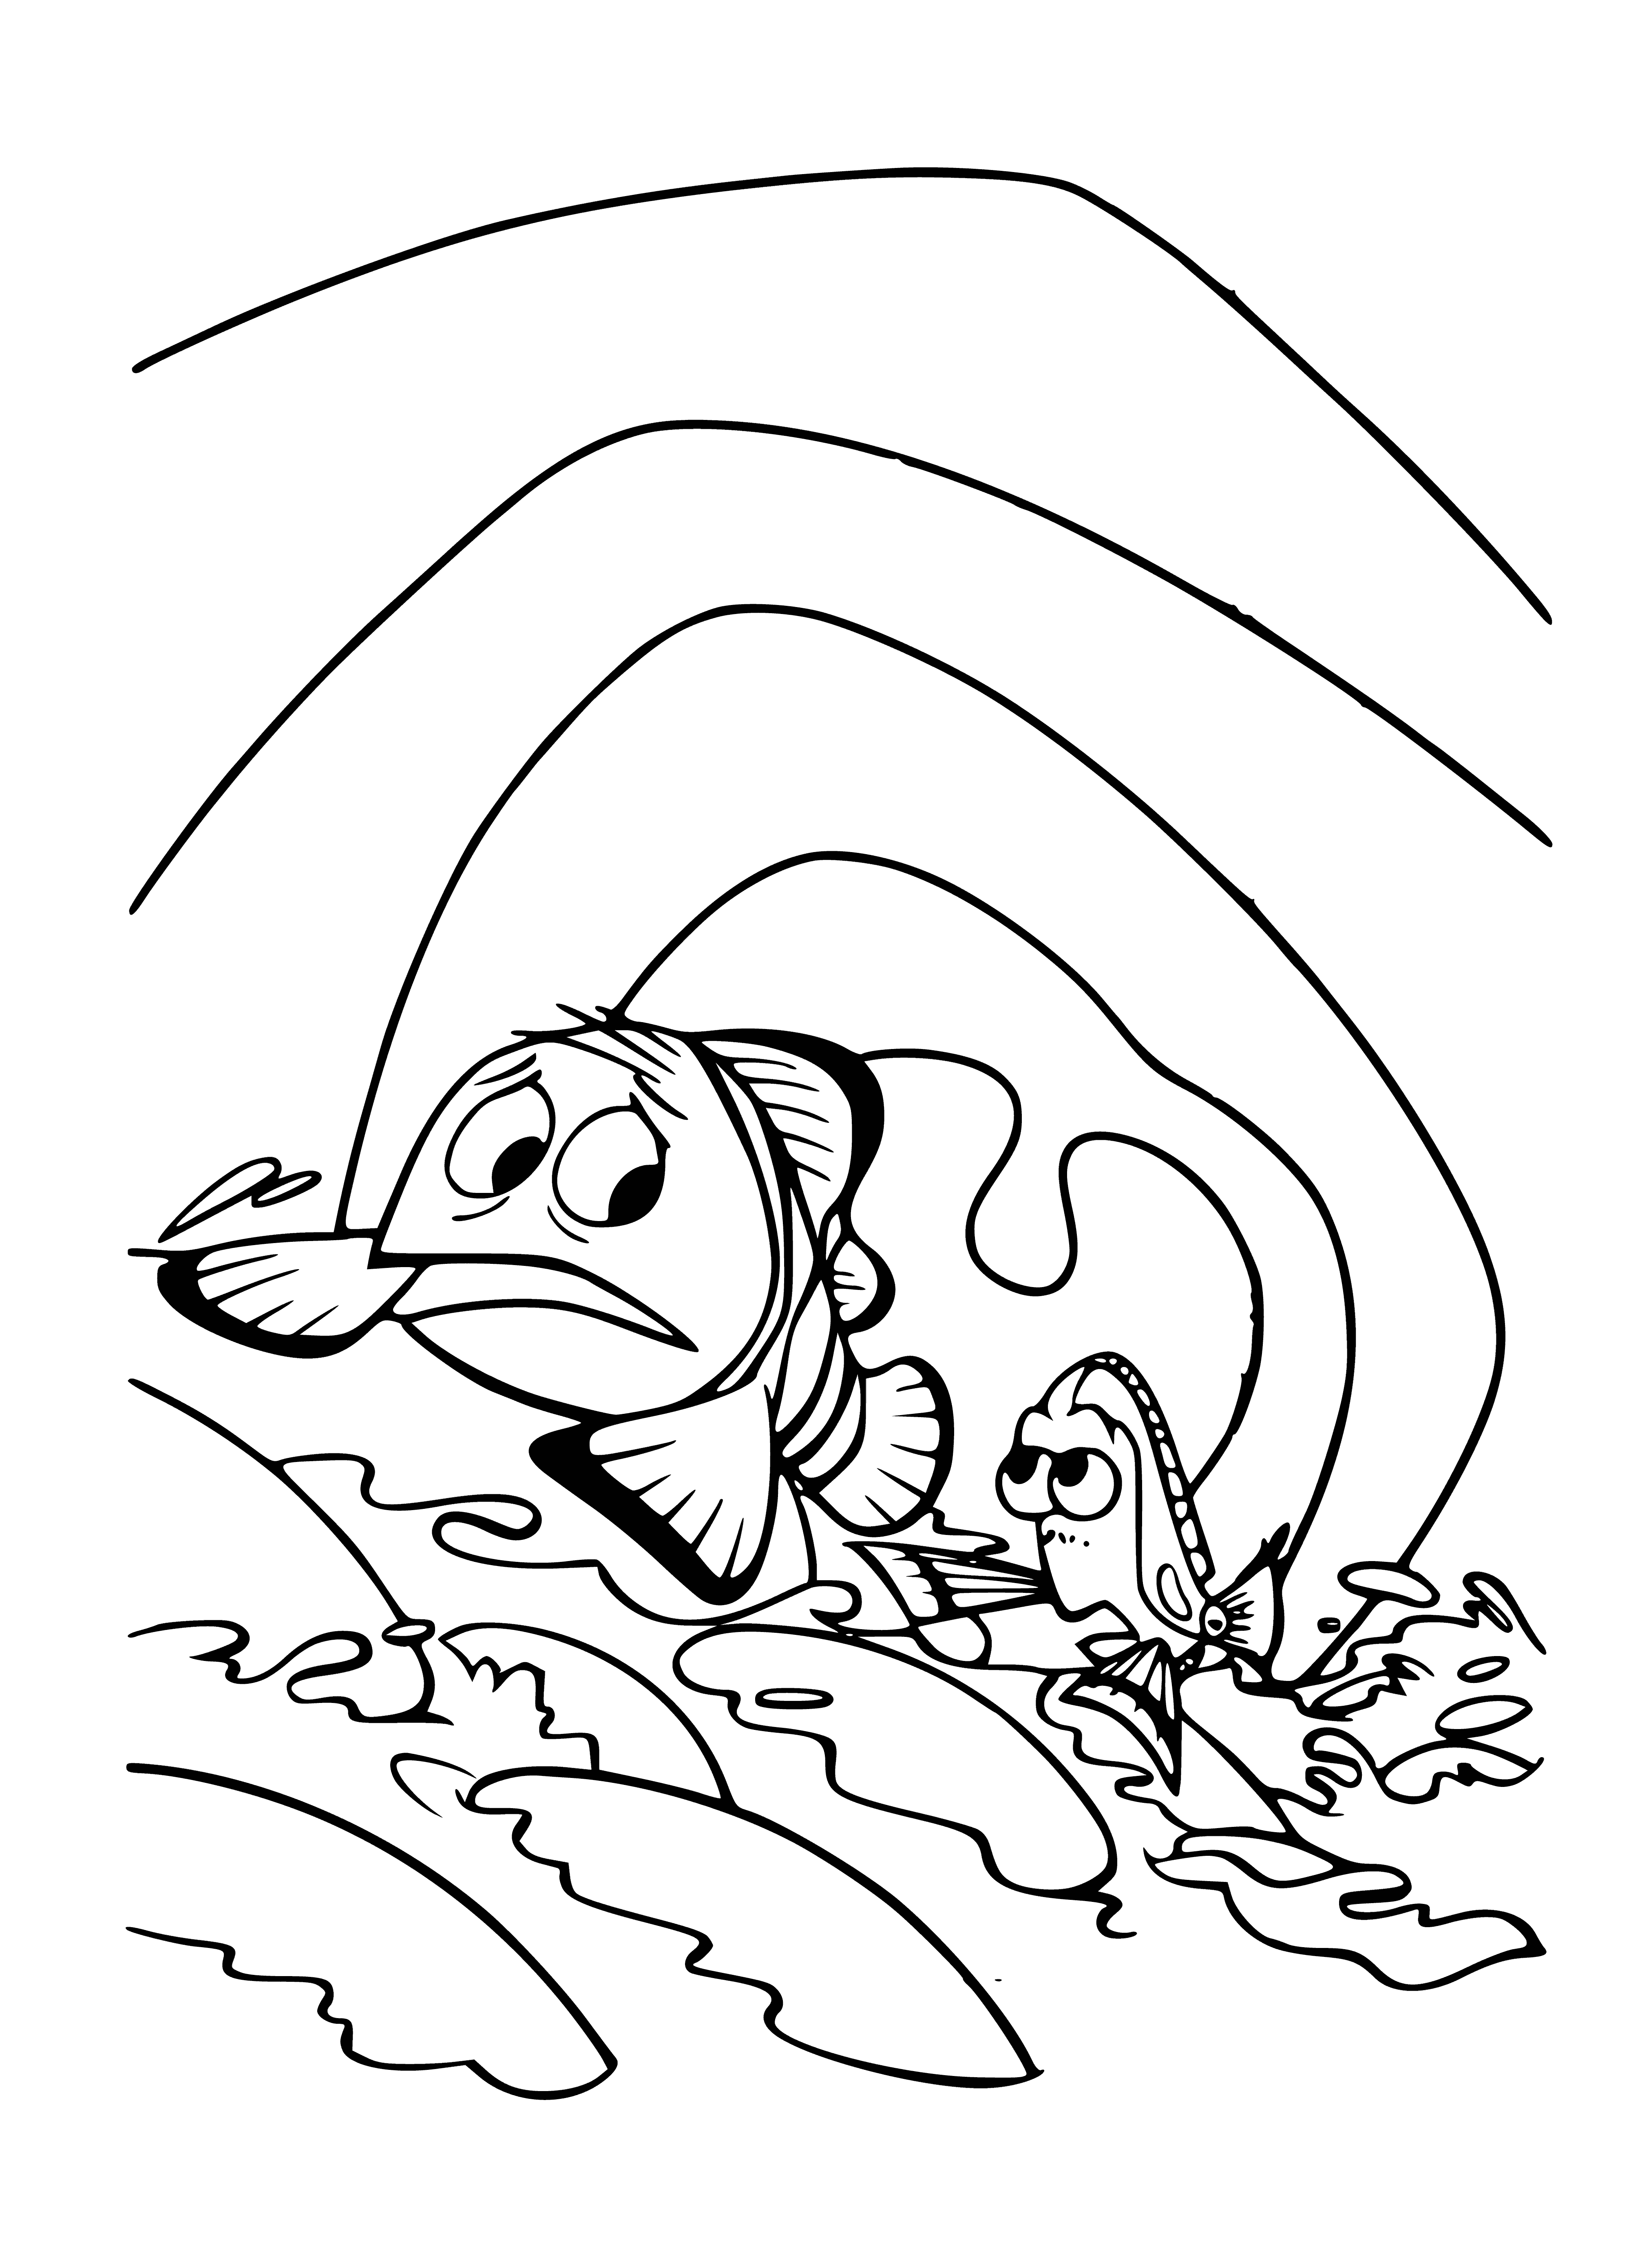 Inside the whale coloring page